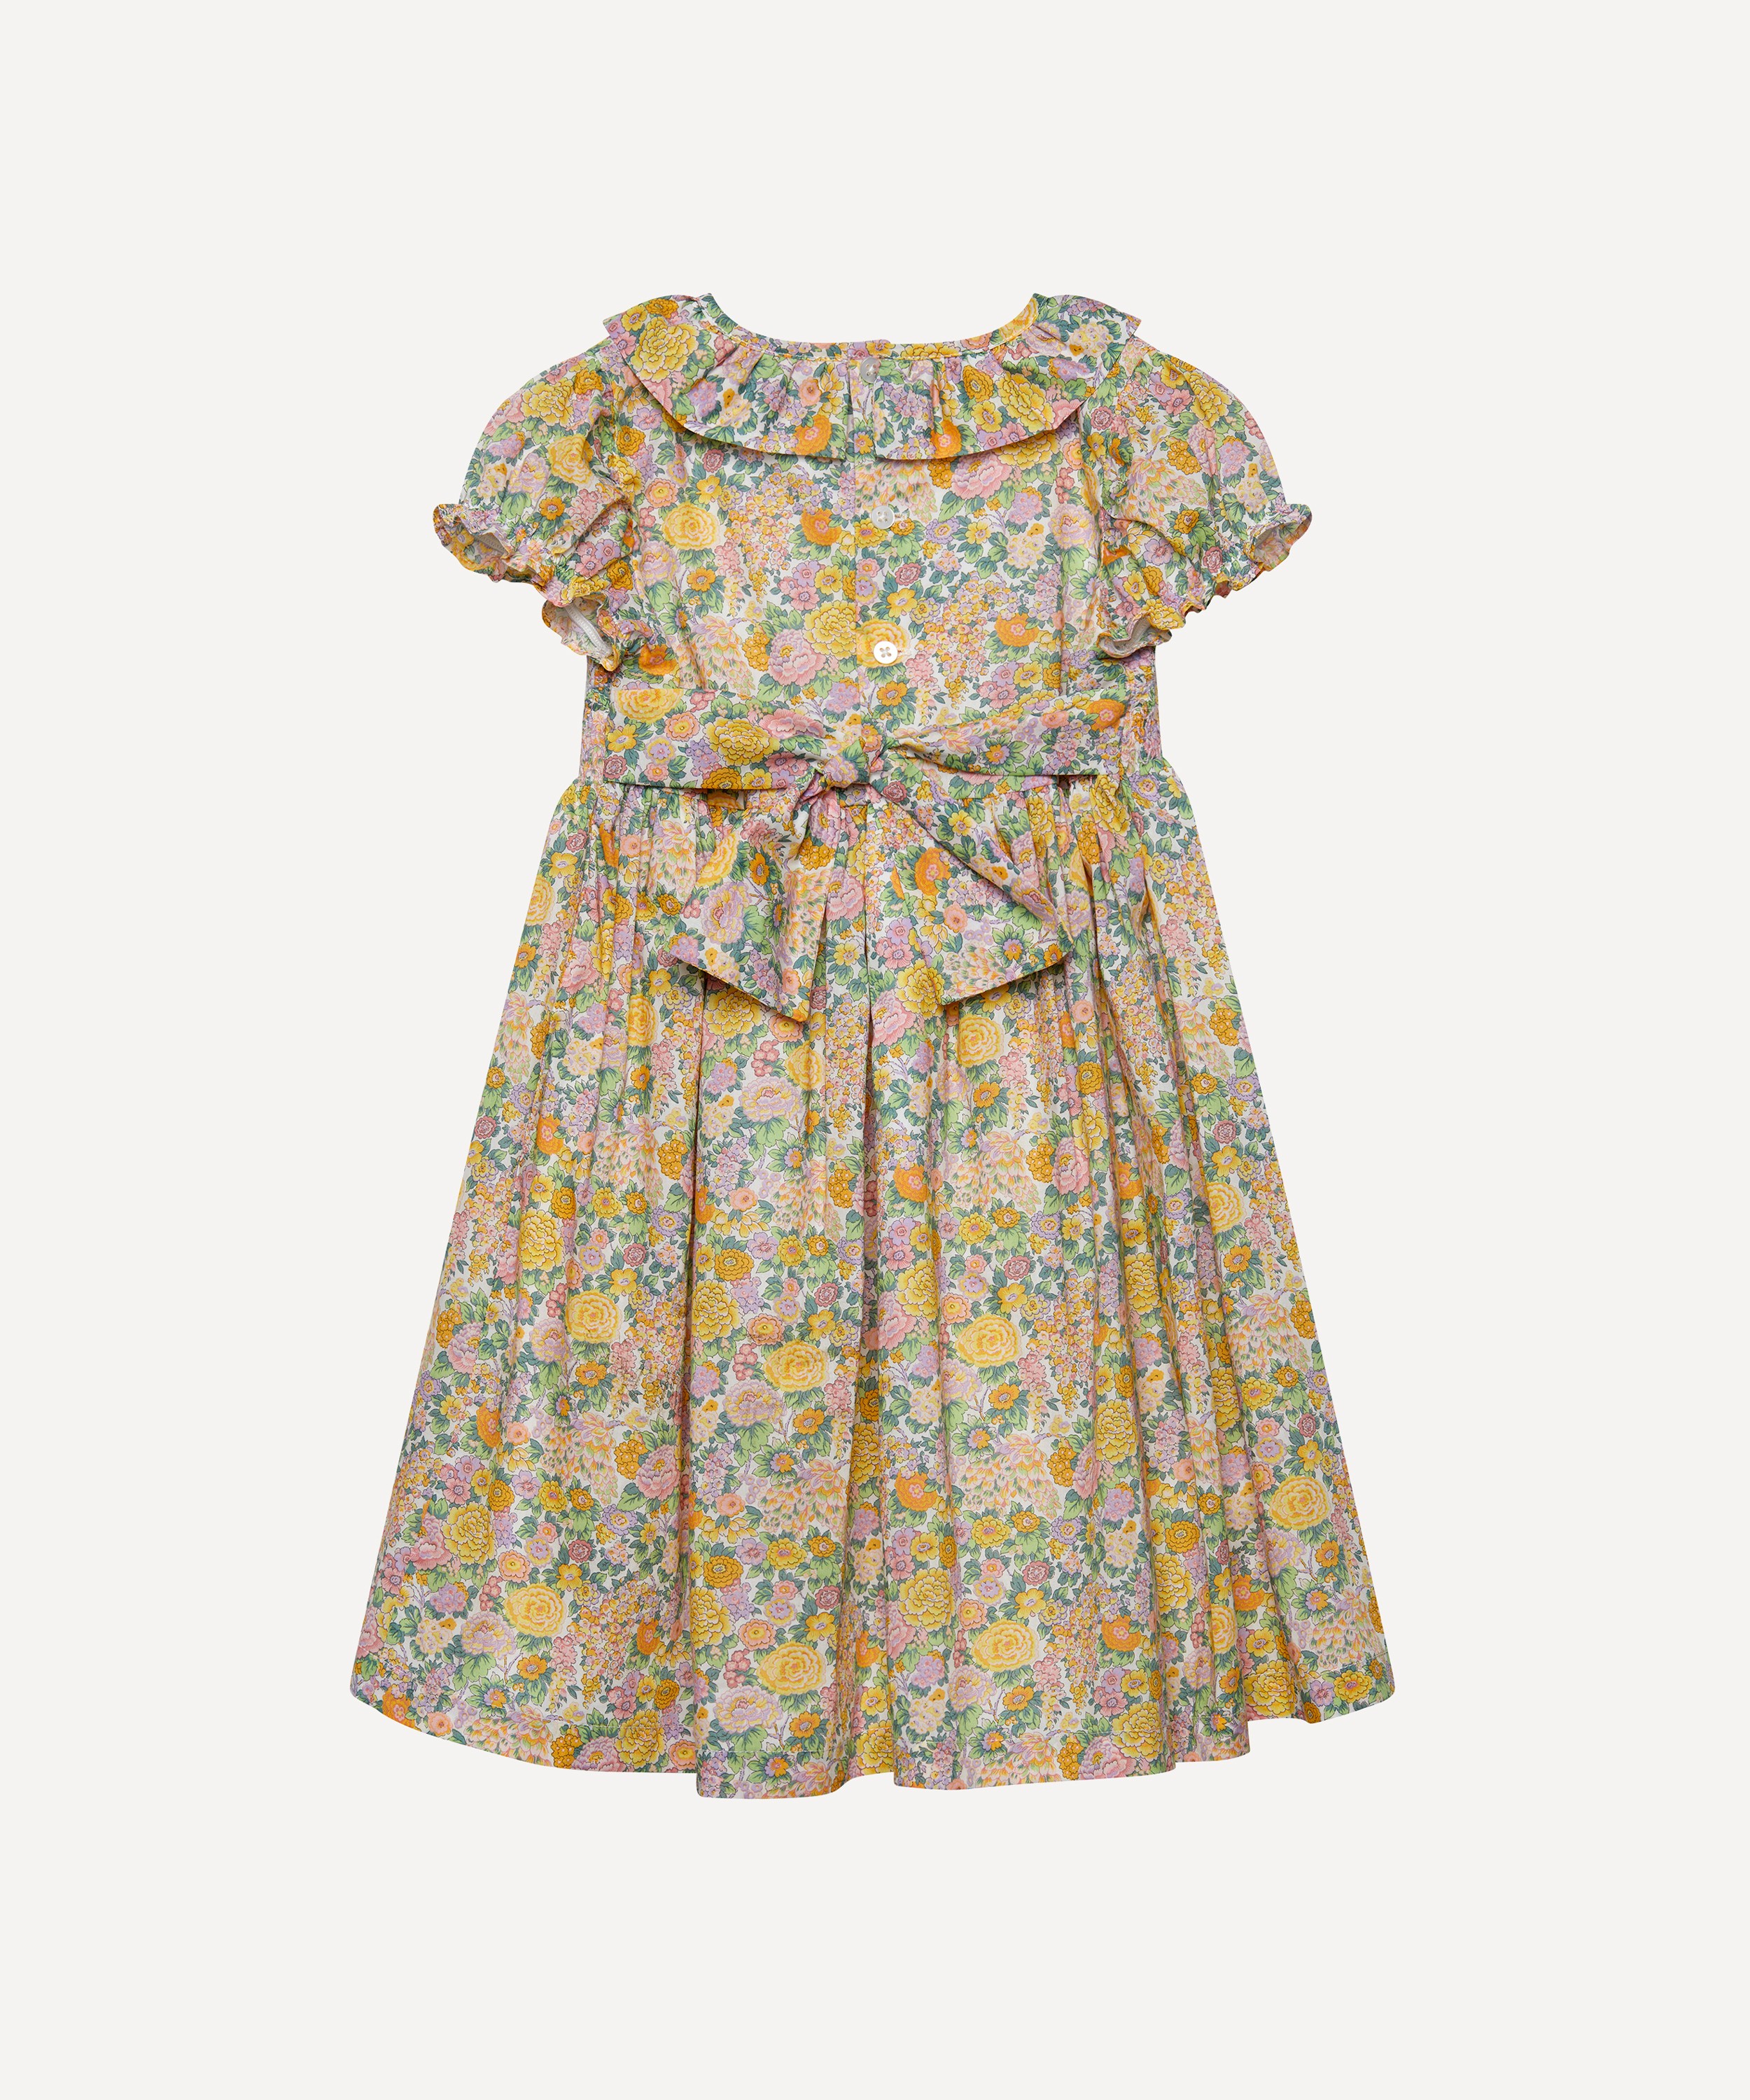 Trotters - Elysian Day Smocked Dress 2-7 Years image number 1